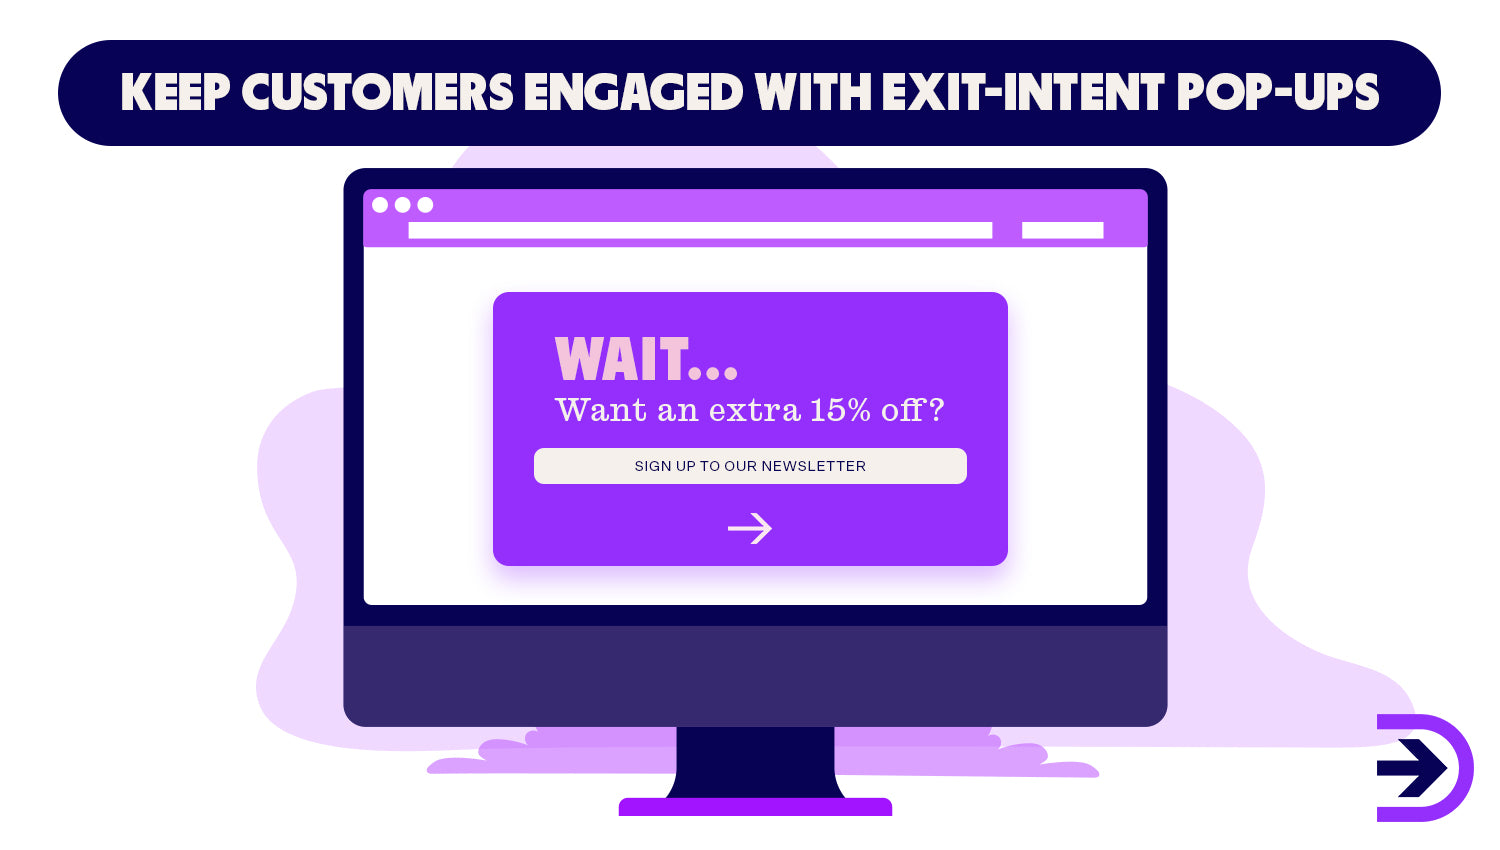 Exit intent pop-ups detect when consumers are about to leave your website and deliver targeted offers. 